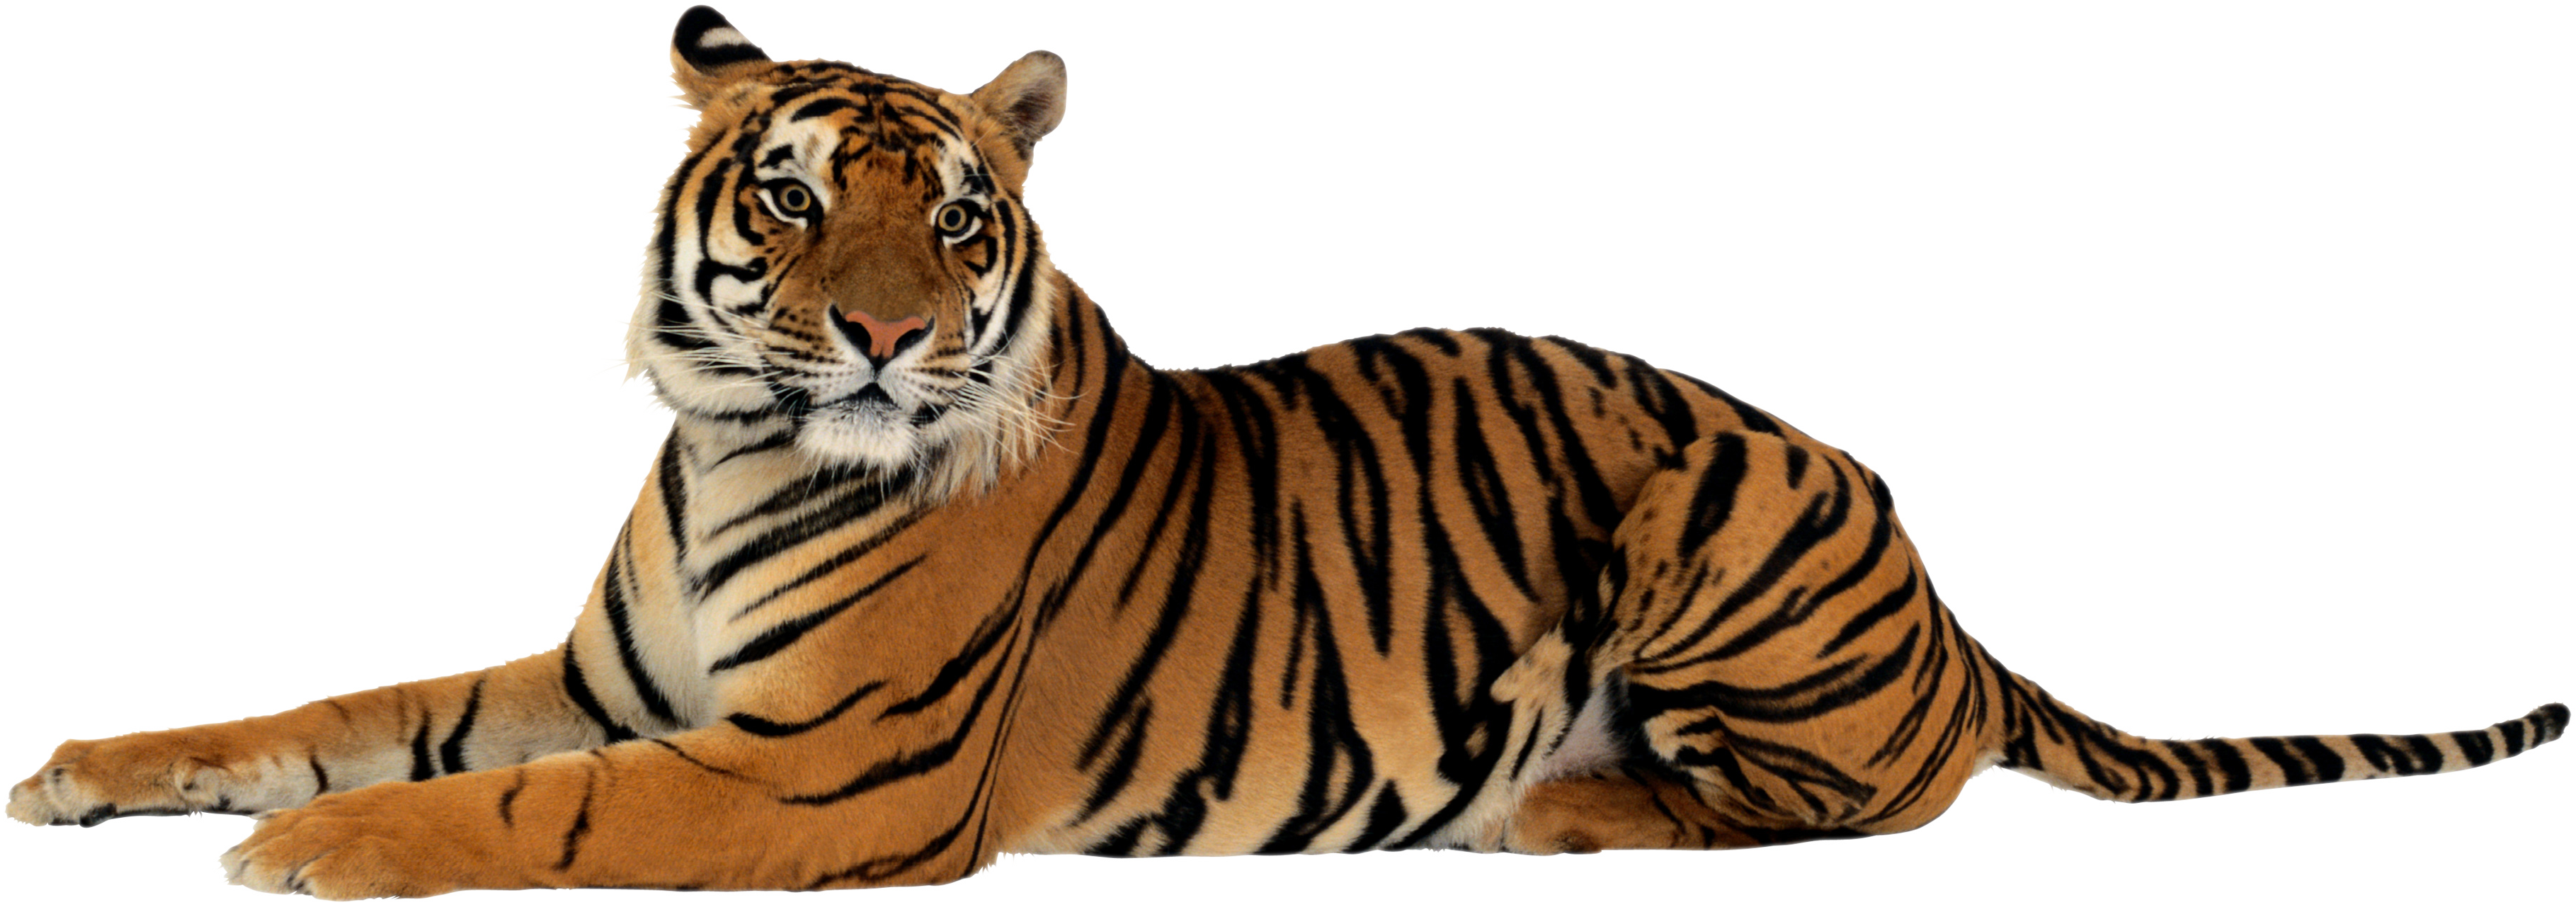 Tigers gallery isolated stock. Clipart tiger mike